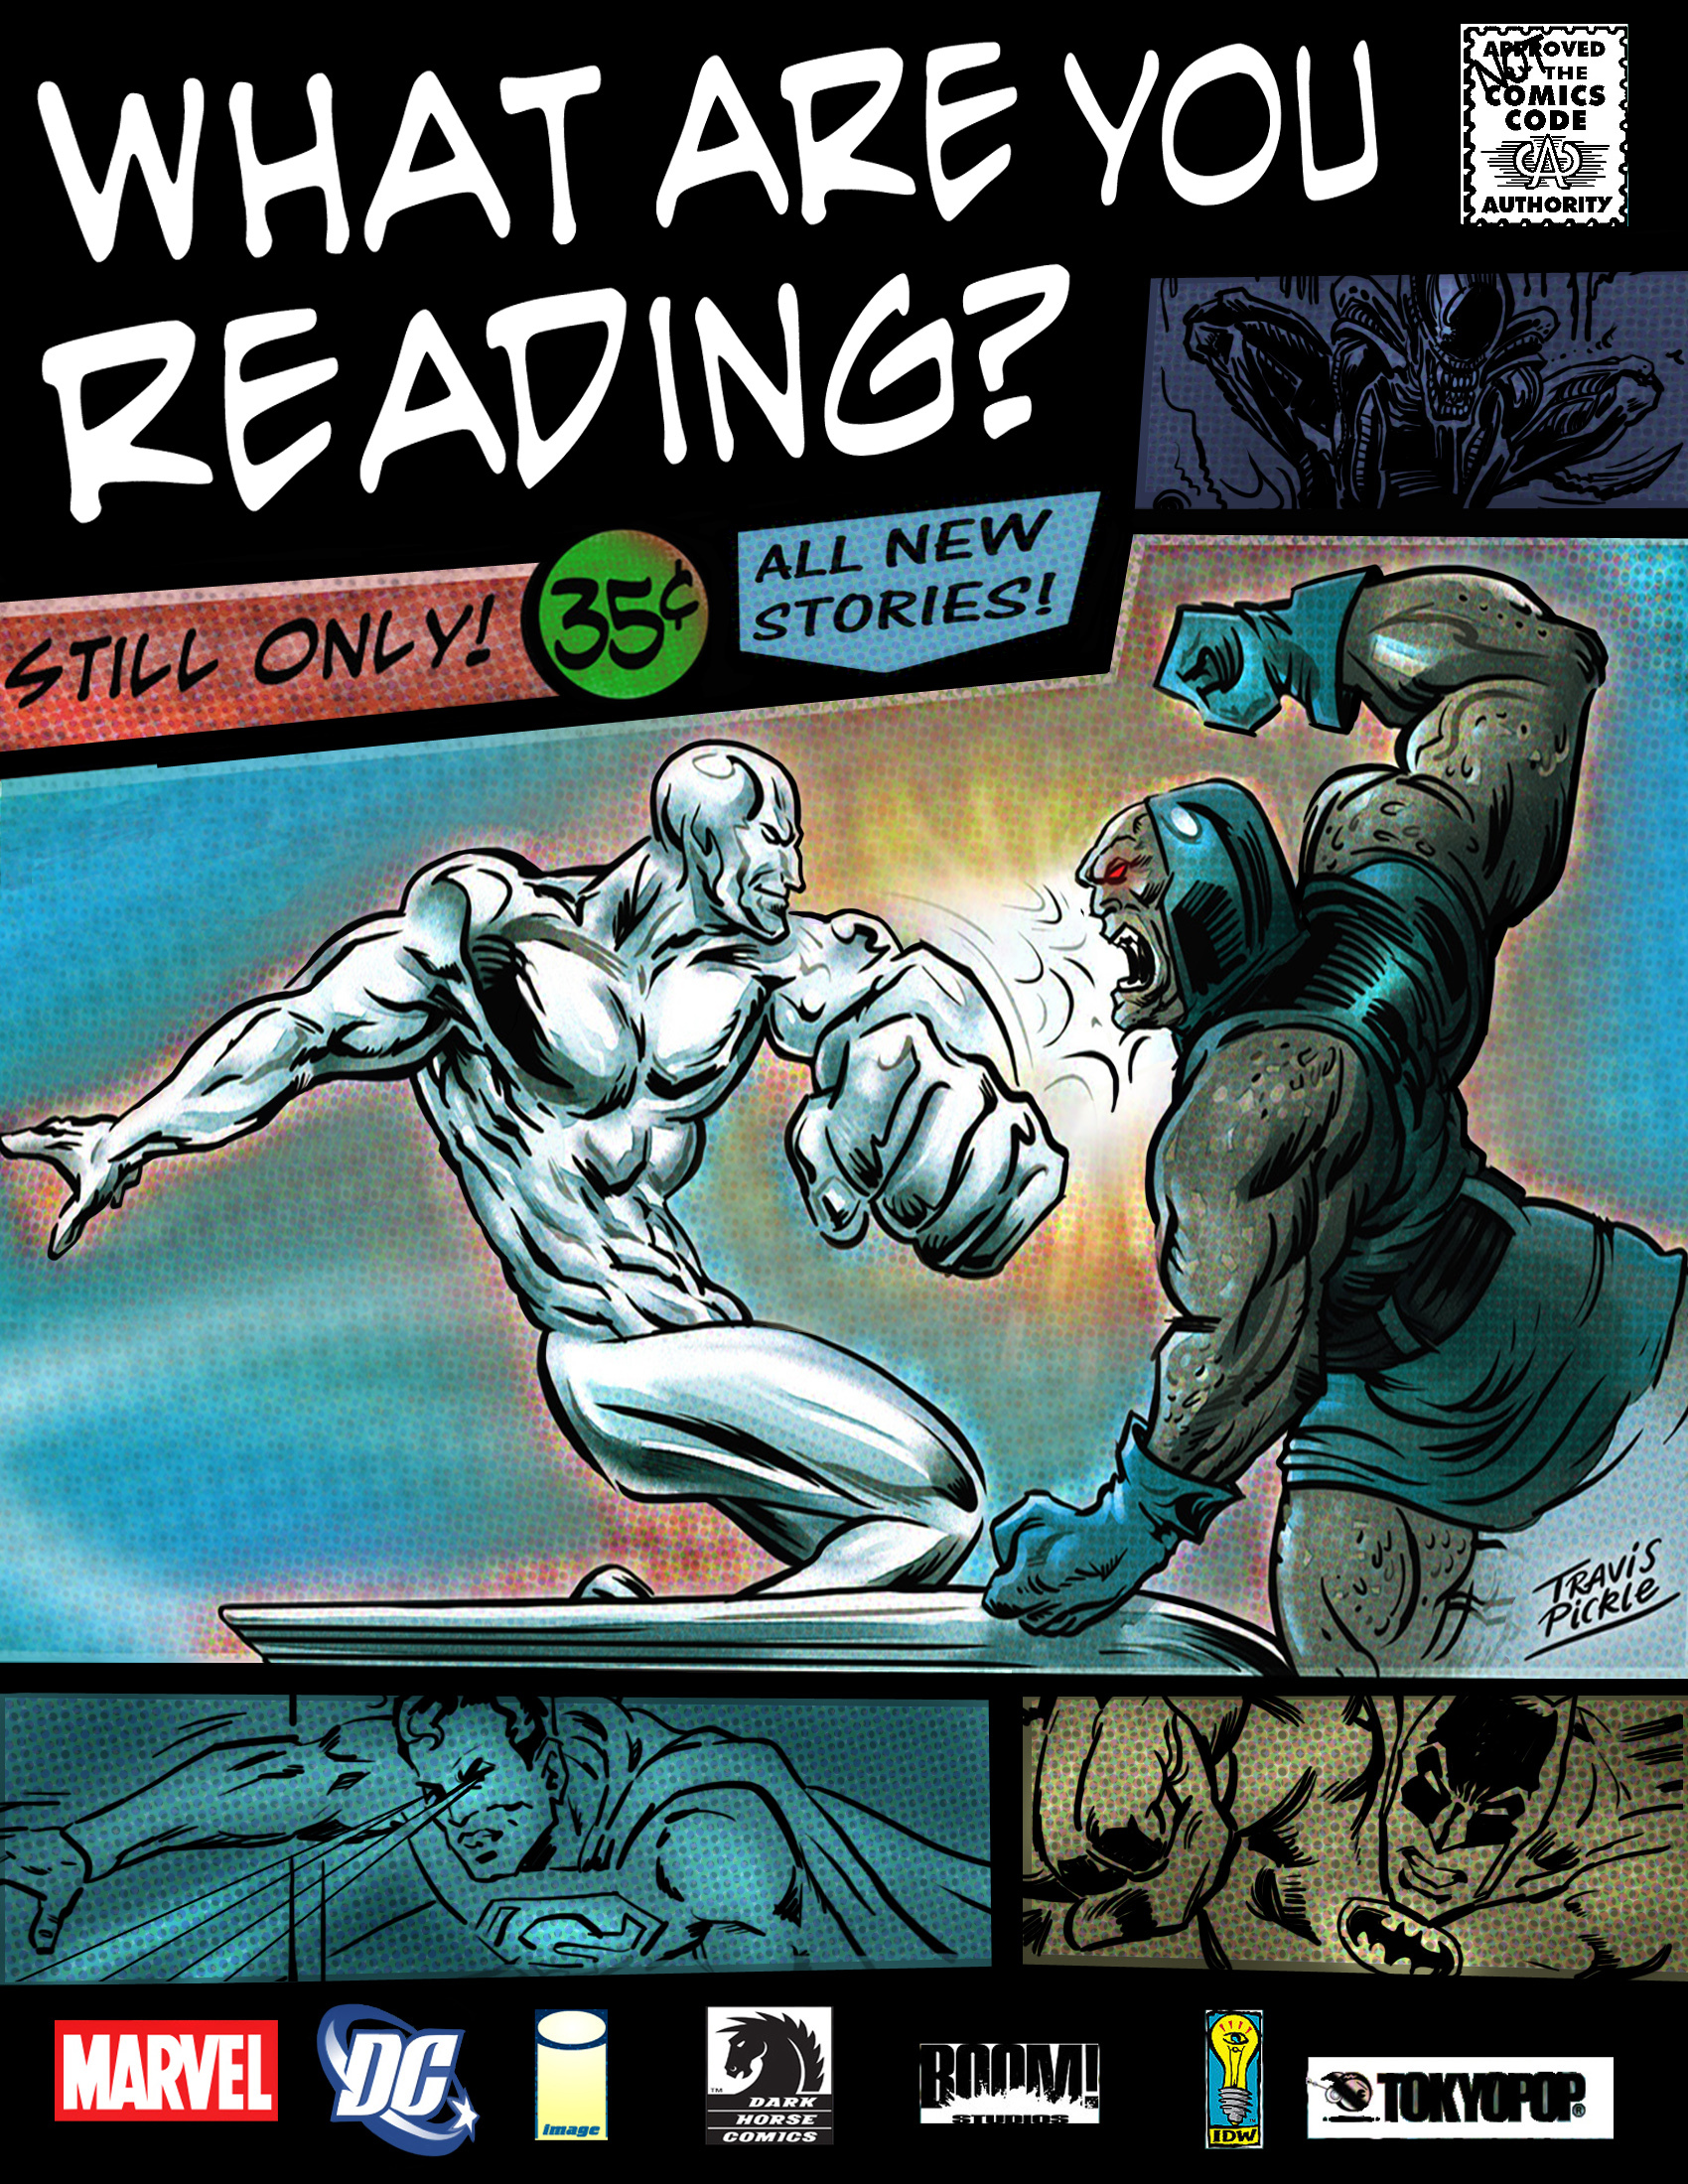 What Are You Reading? Volume 8 Issue 1